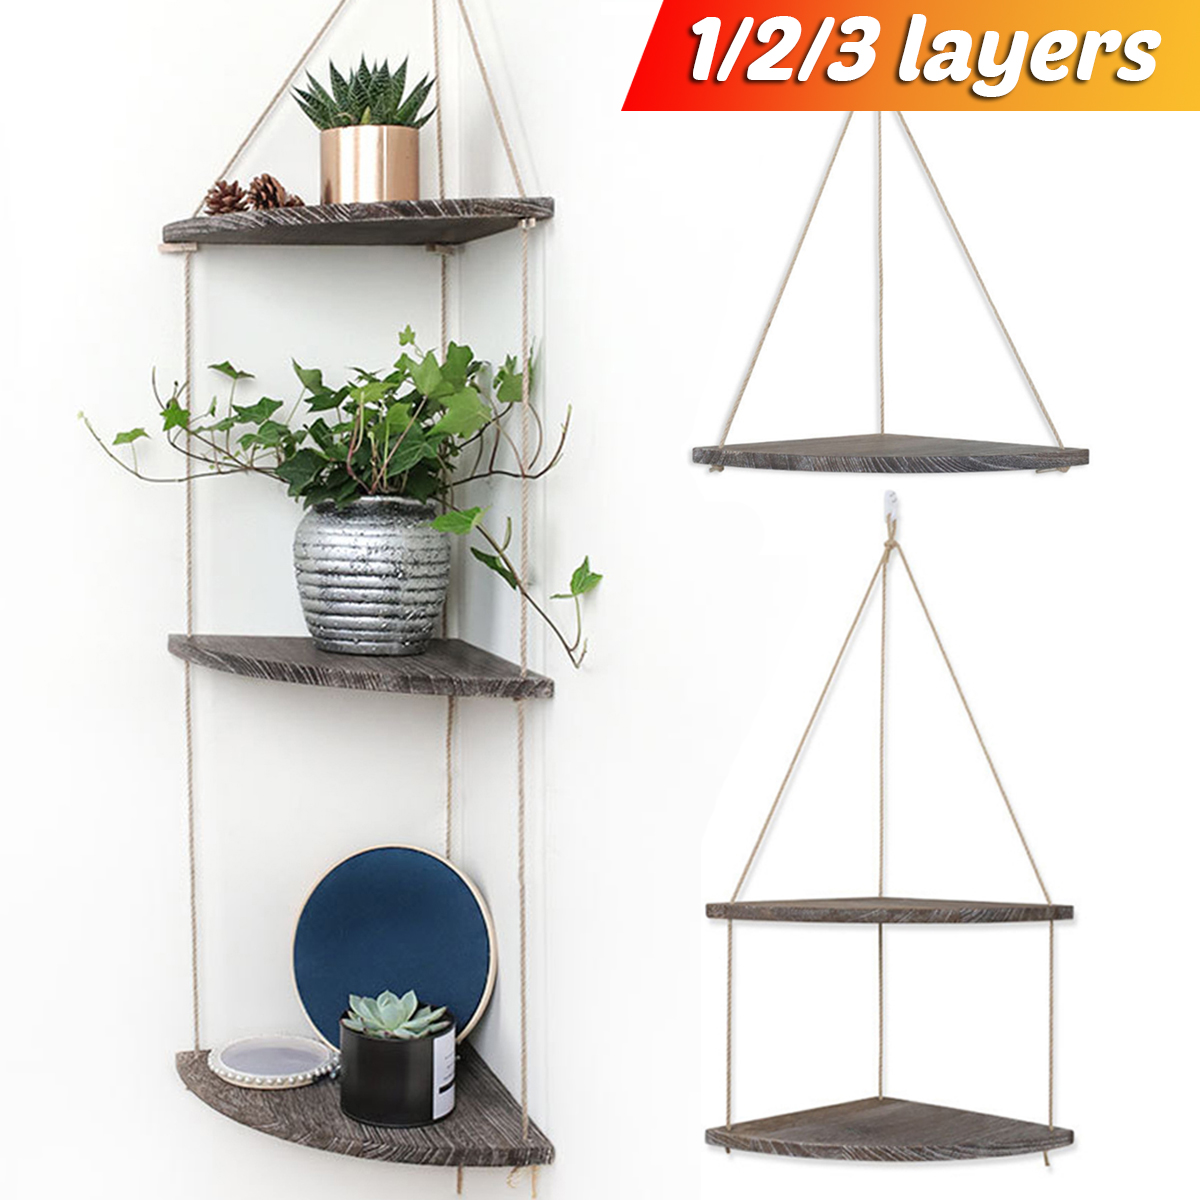 Javiem Wooden Storage Board Flower Pot Rack Wall Shelf Home Decor with Hanging Rope Fire Pit & Outdoor Fireplace Parts